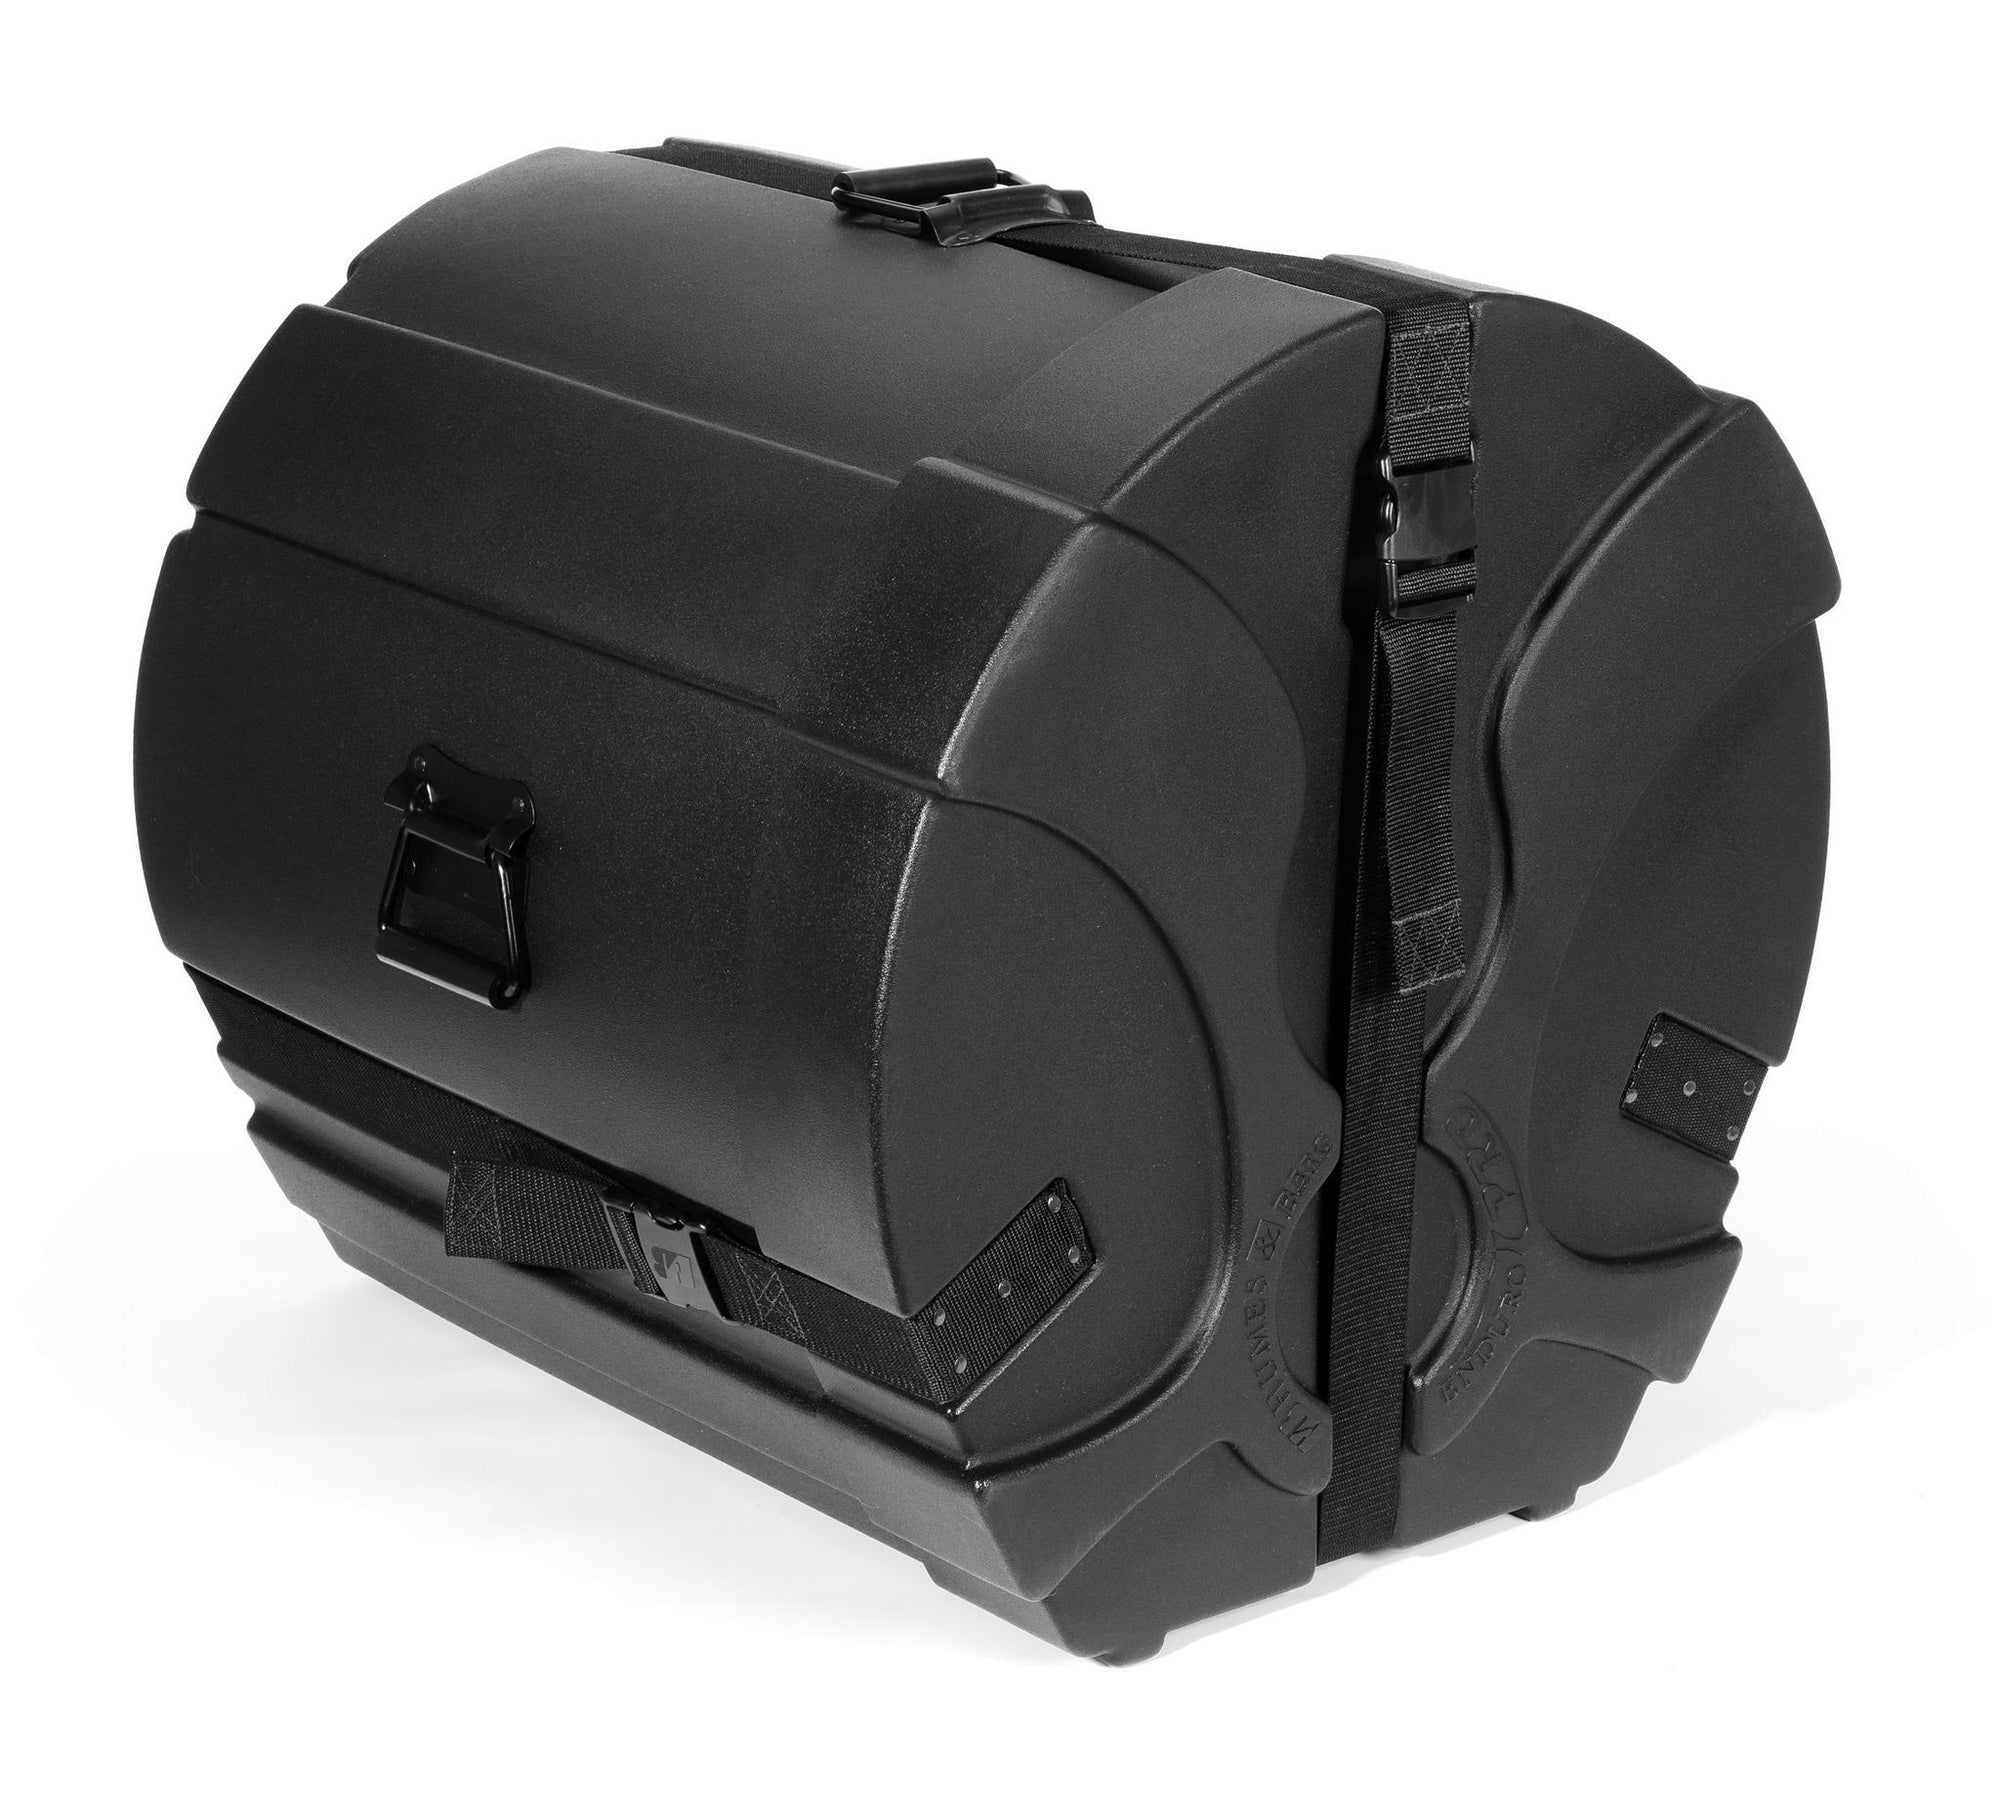 H&B Enduro Pro 20 x 24 Inches Bass Drum Case - Black with Pro Lining